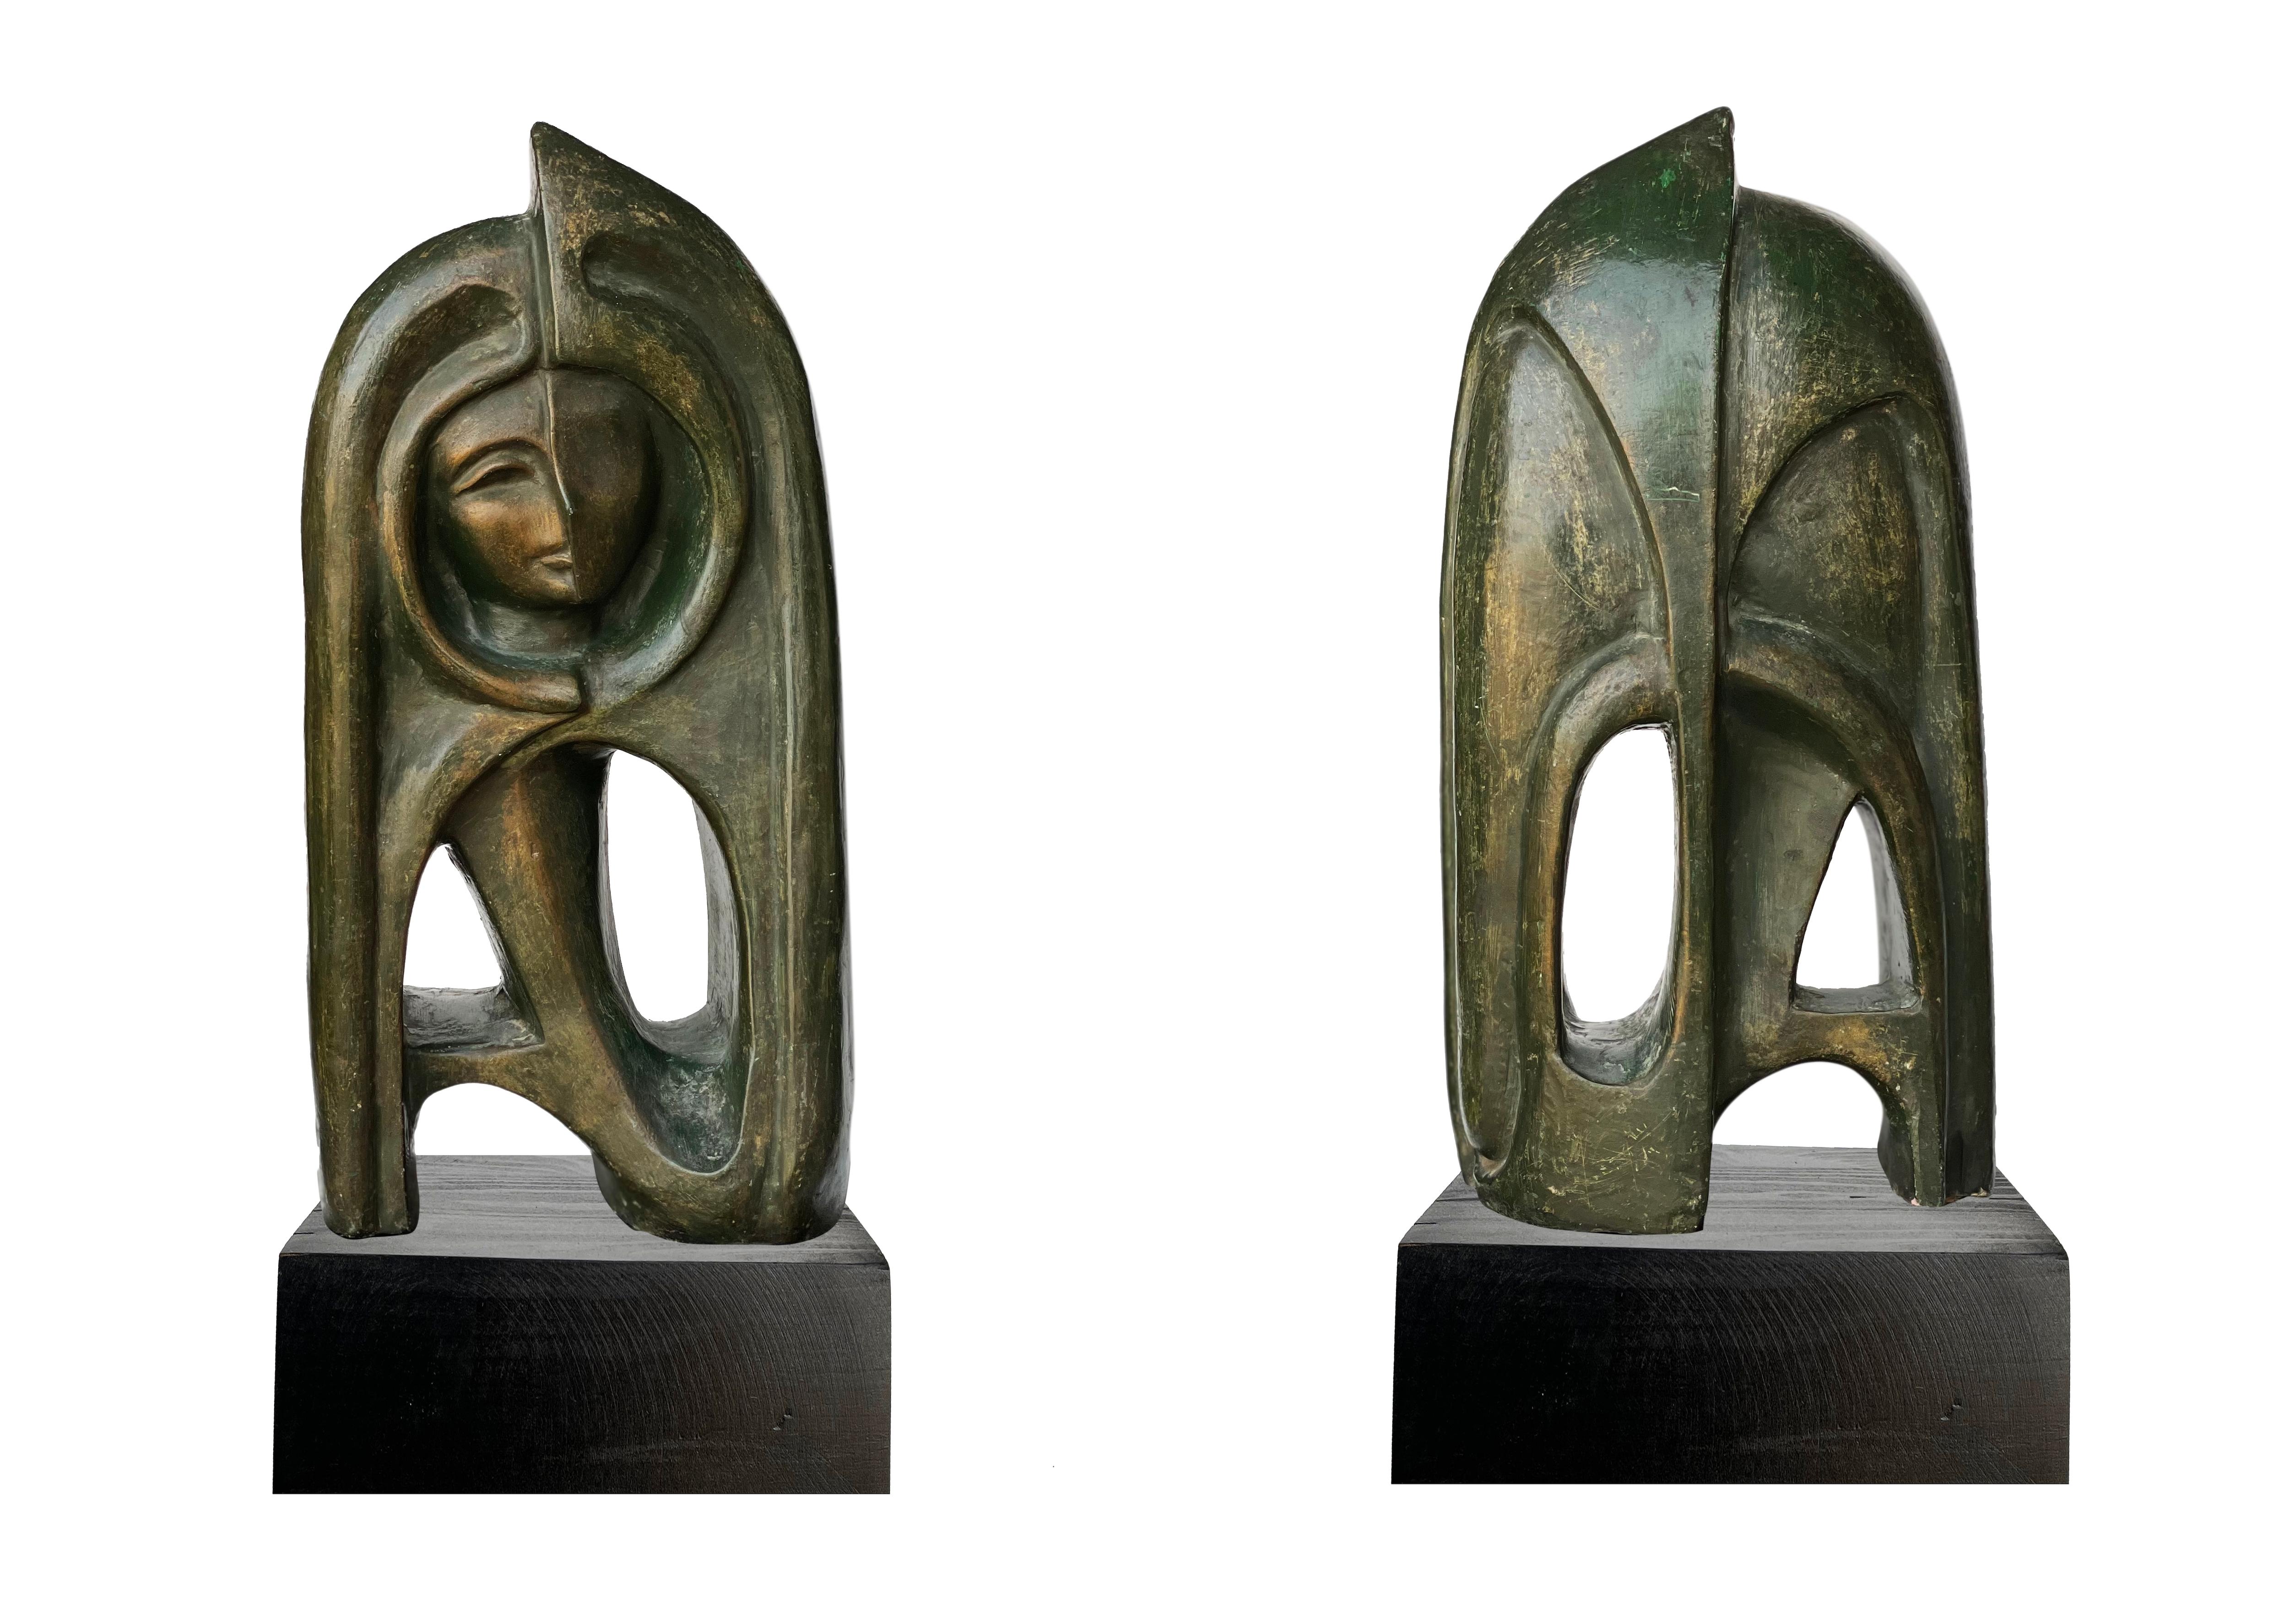 "Abstract Visage I" Sculpture 18" x 8" inch by Ibrahim Abd Elmalak

Double-faced 
Fiberglass
Signed & Dated

Sculptures that mostly depict his characteristic figures of feminine form and feeling – a central element to Abd Elmalak’s creative process